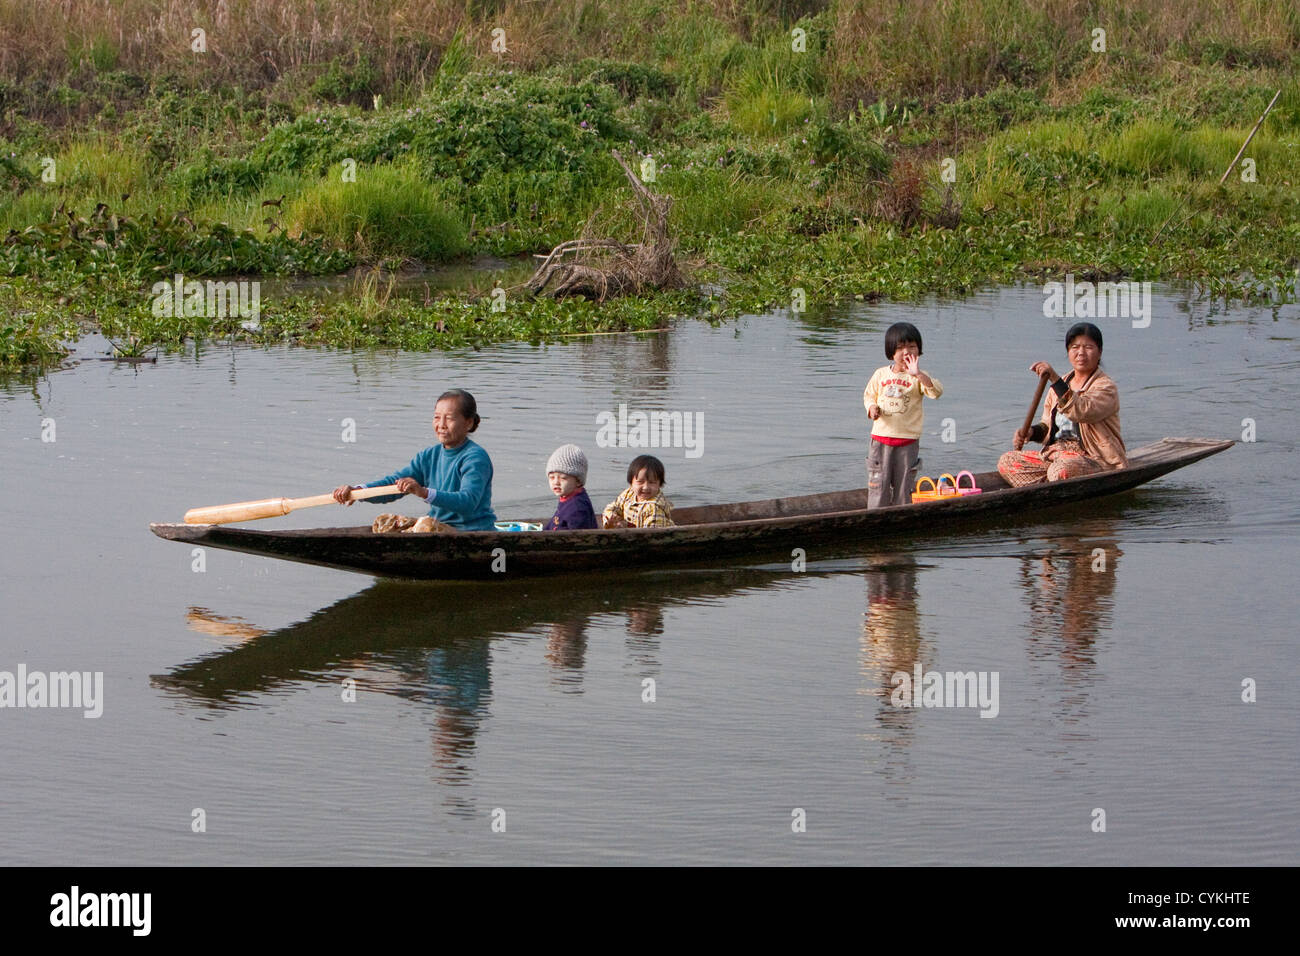 Myanmar, Burma. Mother and Children in Canoe, Paddling, Inle Lake, Shan State. Stock Photo